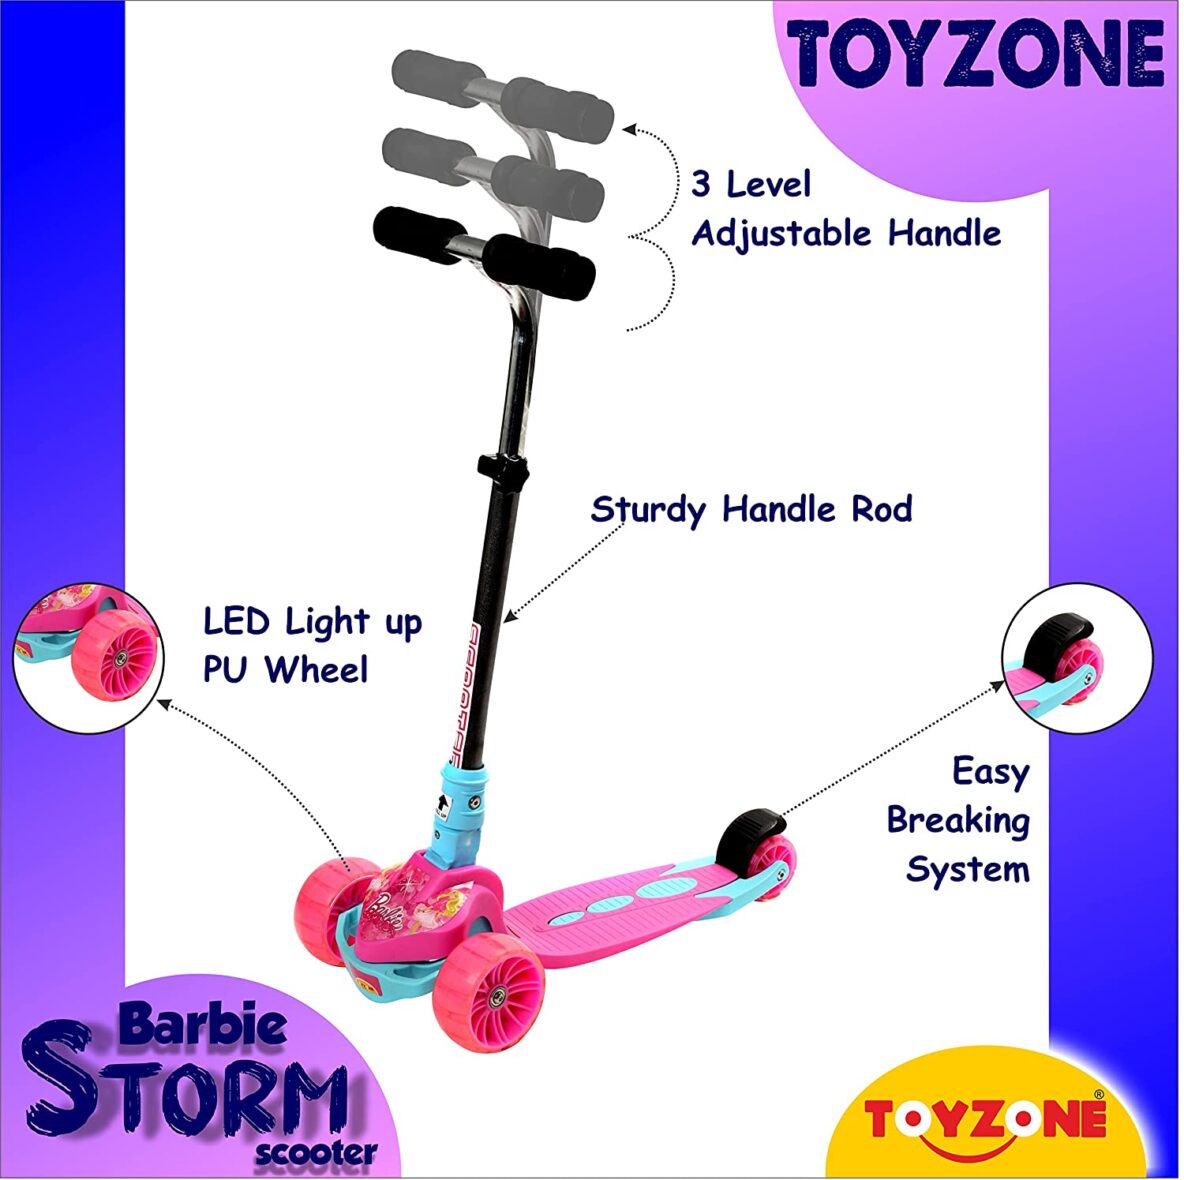 Toyzone Scooter Storm  Kids Skate Ride on  Smart Kick Scooter  Adjustable Height and Rear Brake  Foldable Scooter  for Kids Age 6+ Years Visit the Toyzone Store2